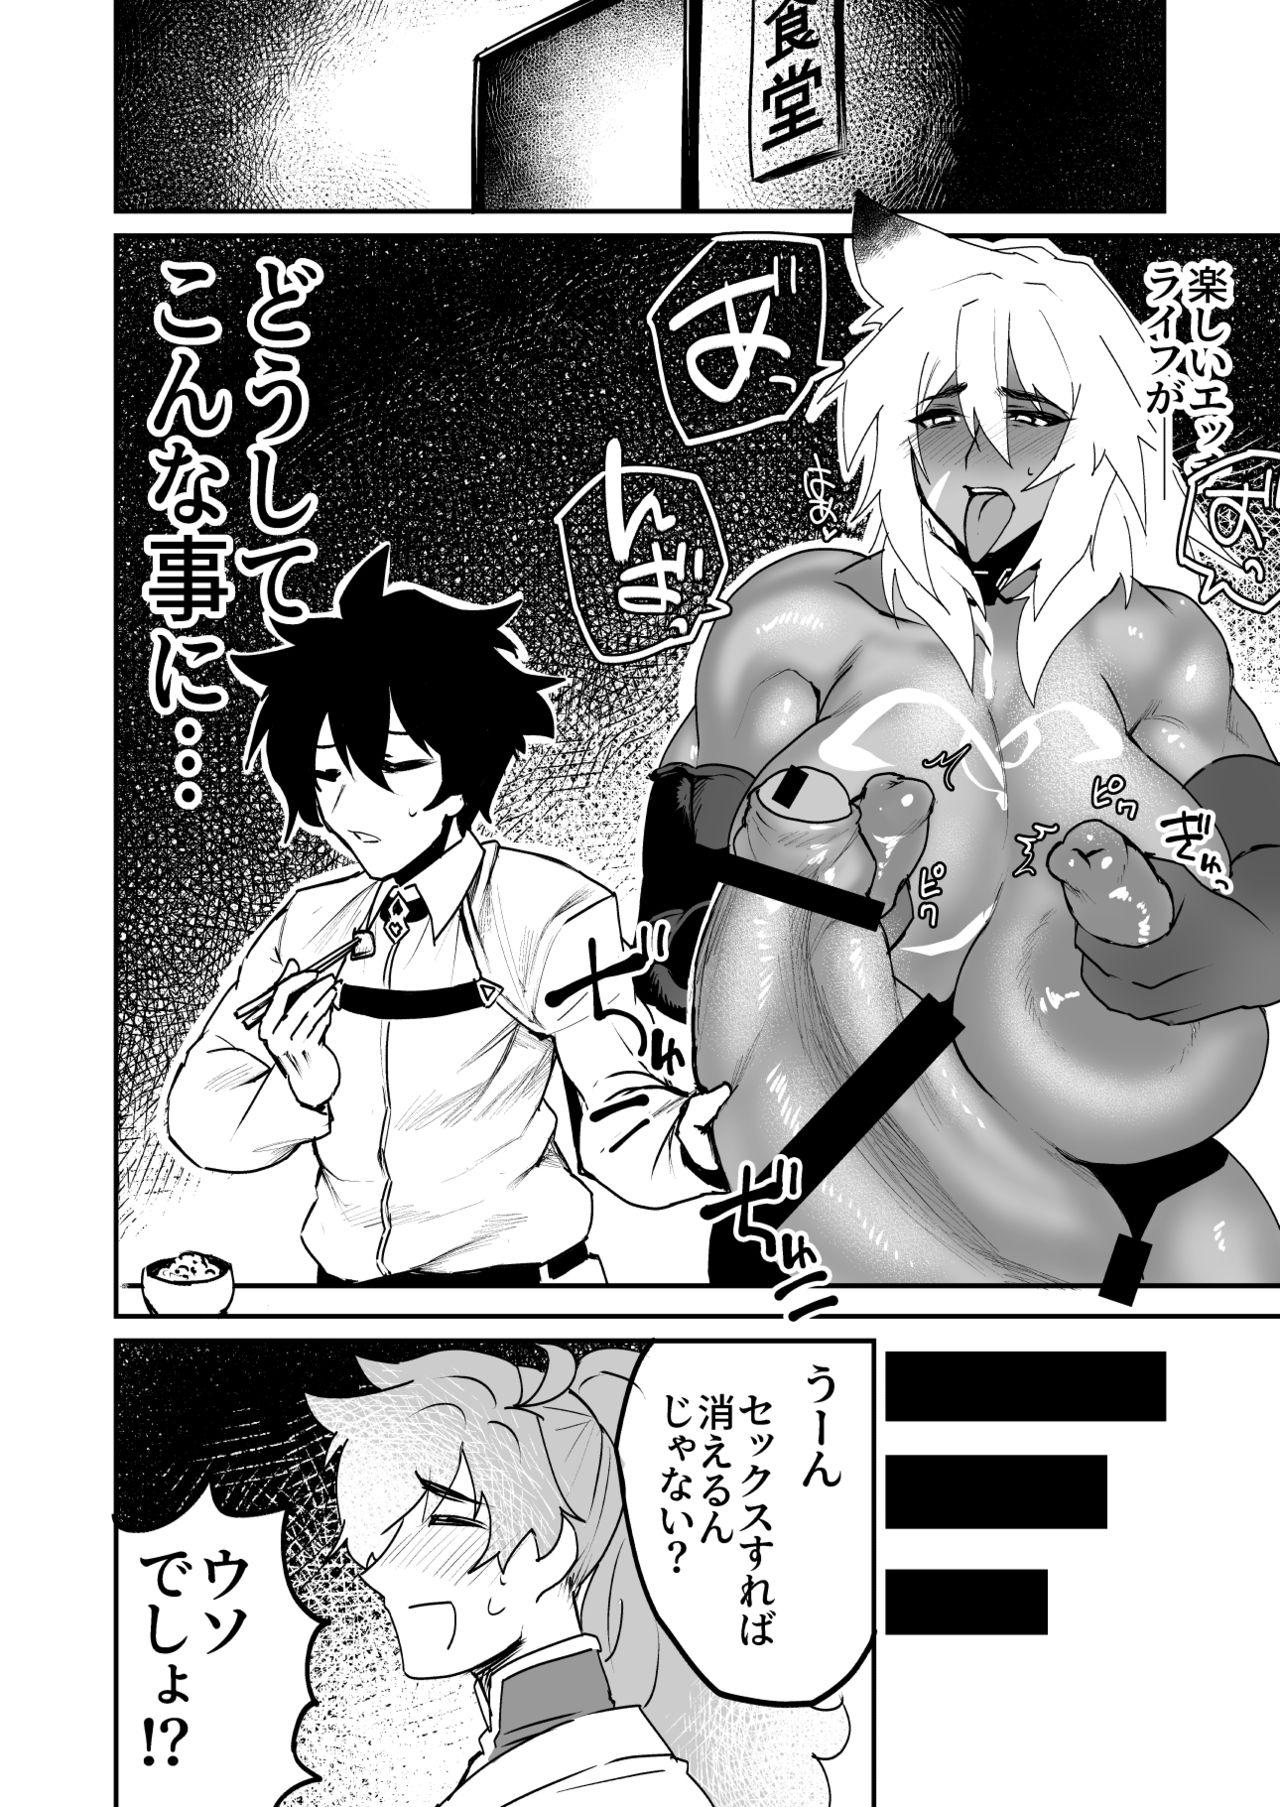 Free 18 Year Old Porn Fall of the Illusory Big Titted Male Vagina - Fate grand order Mum - Page 9